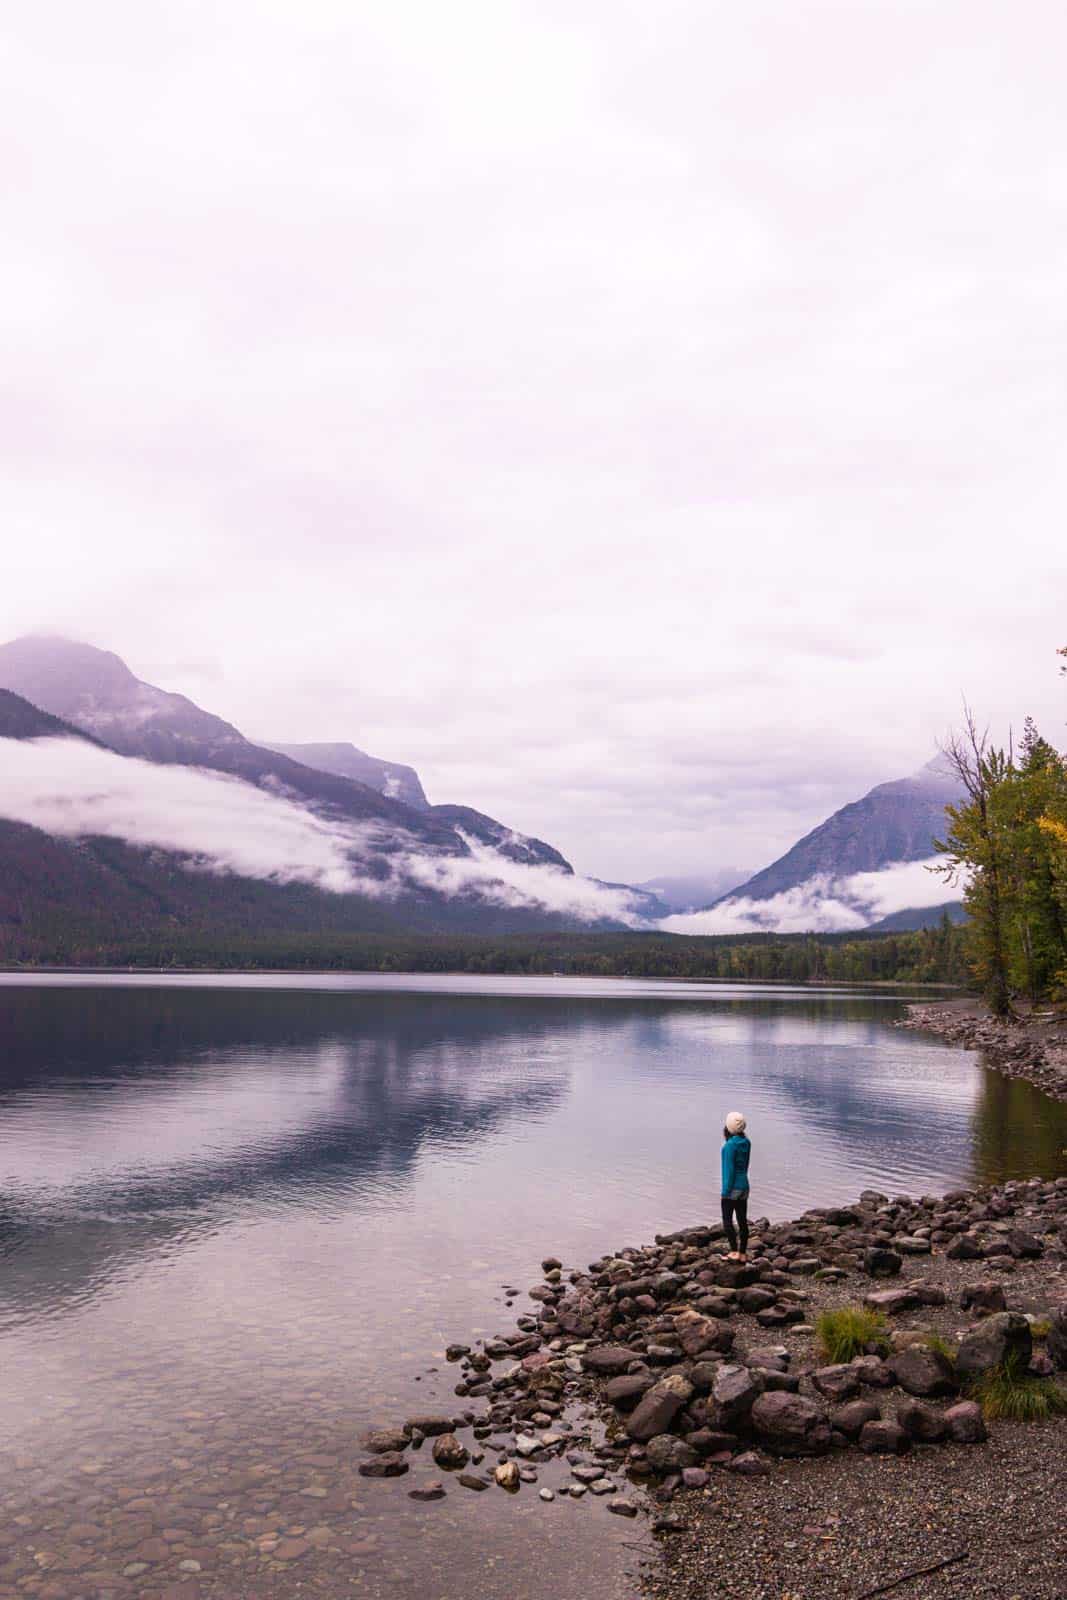 Glacier National Park is a highlight on a Montana road trip.